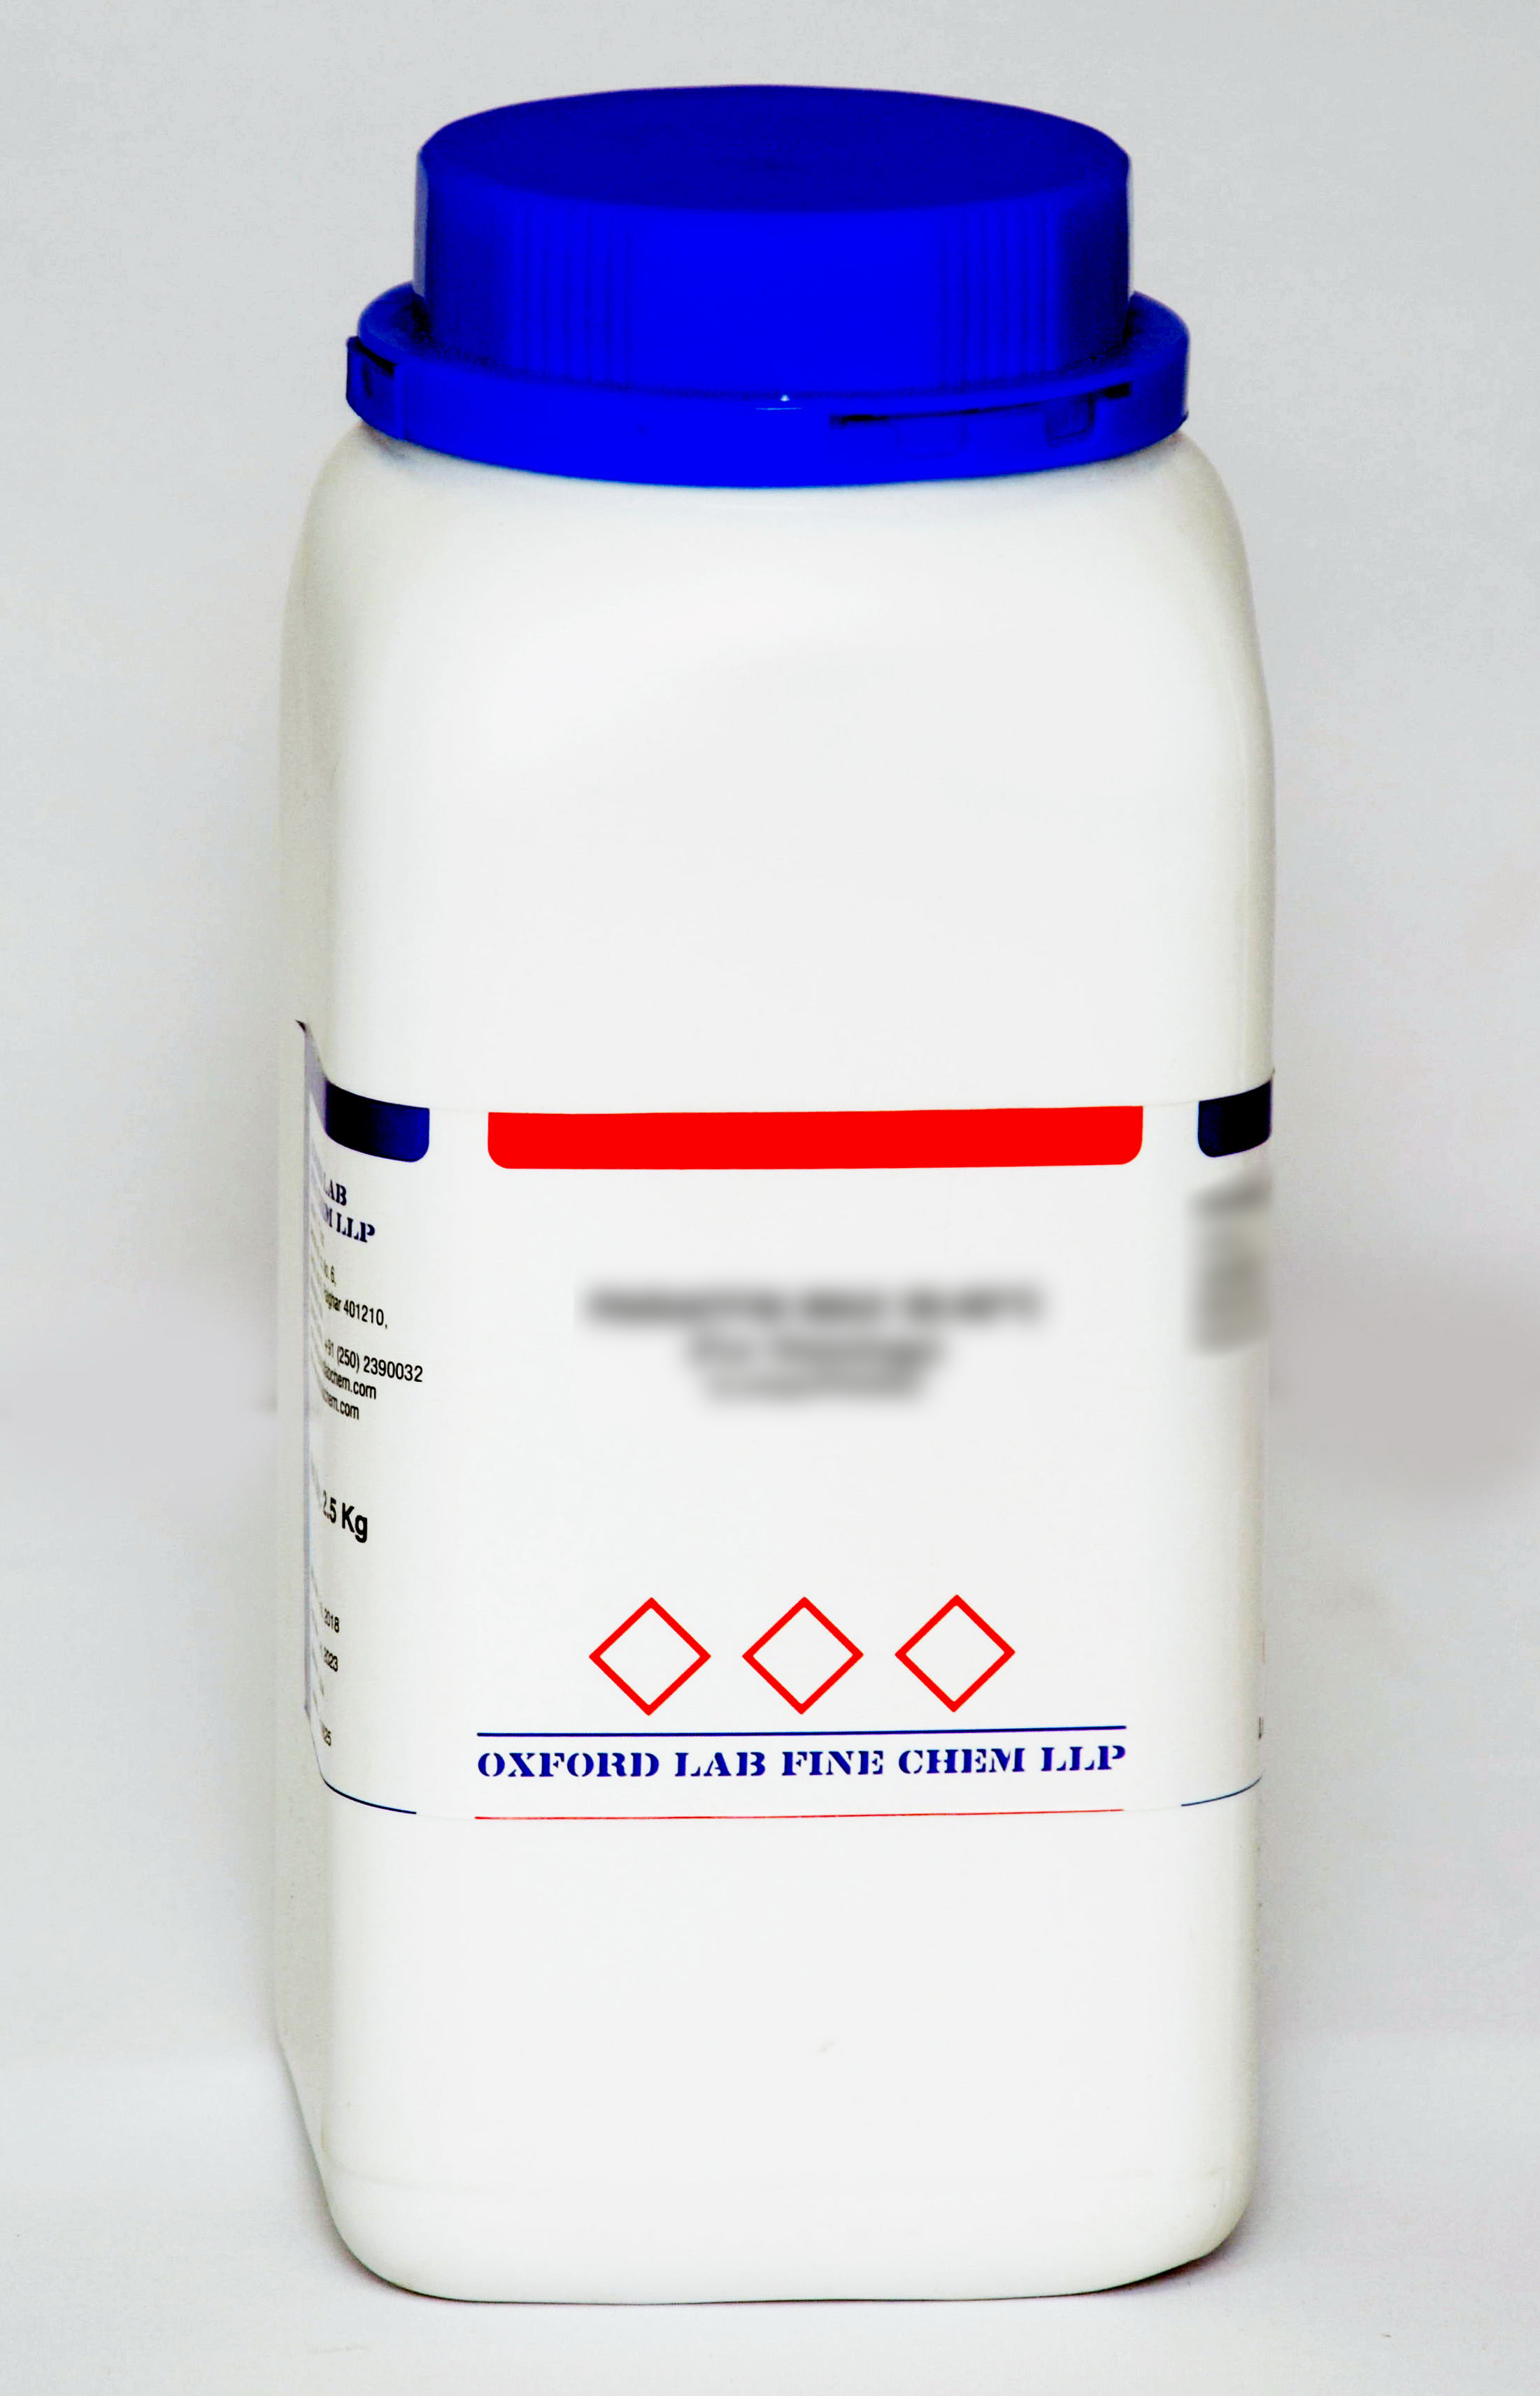 HYDROQUINONE DIMETHYL ETHER 99% (For Synthesis)